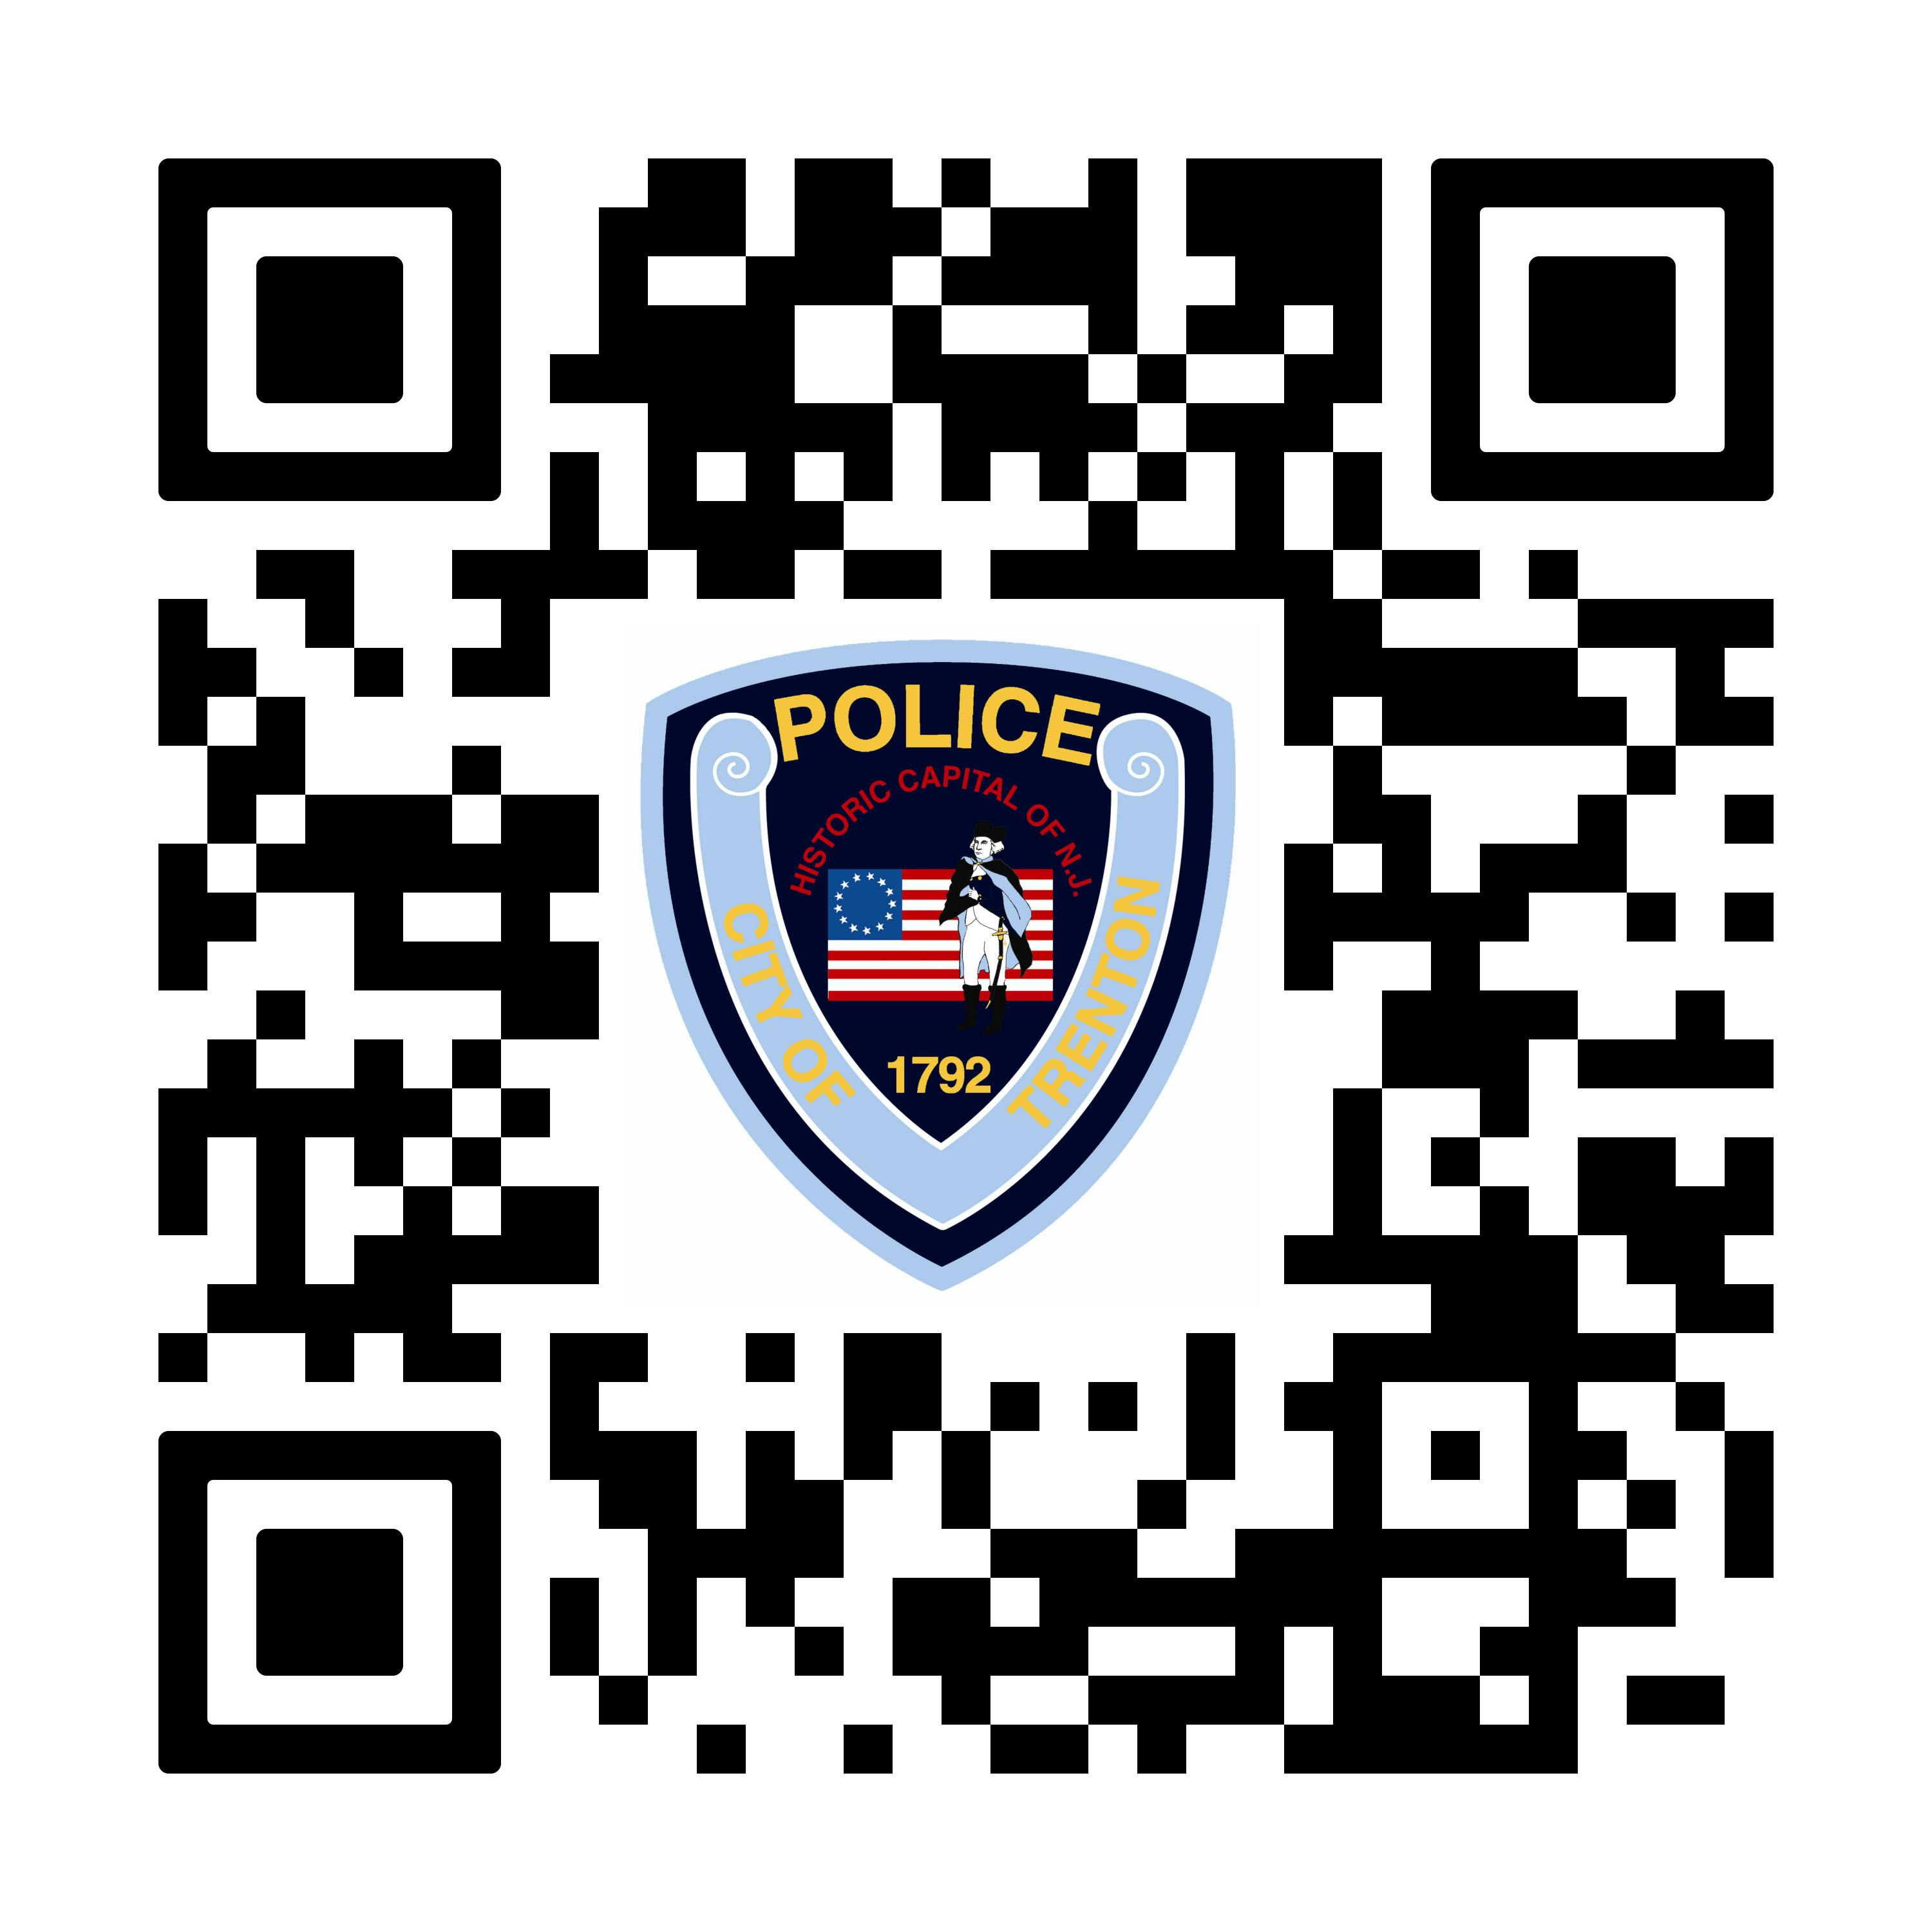 Scan here to go directly to state application site 